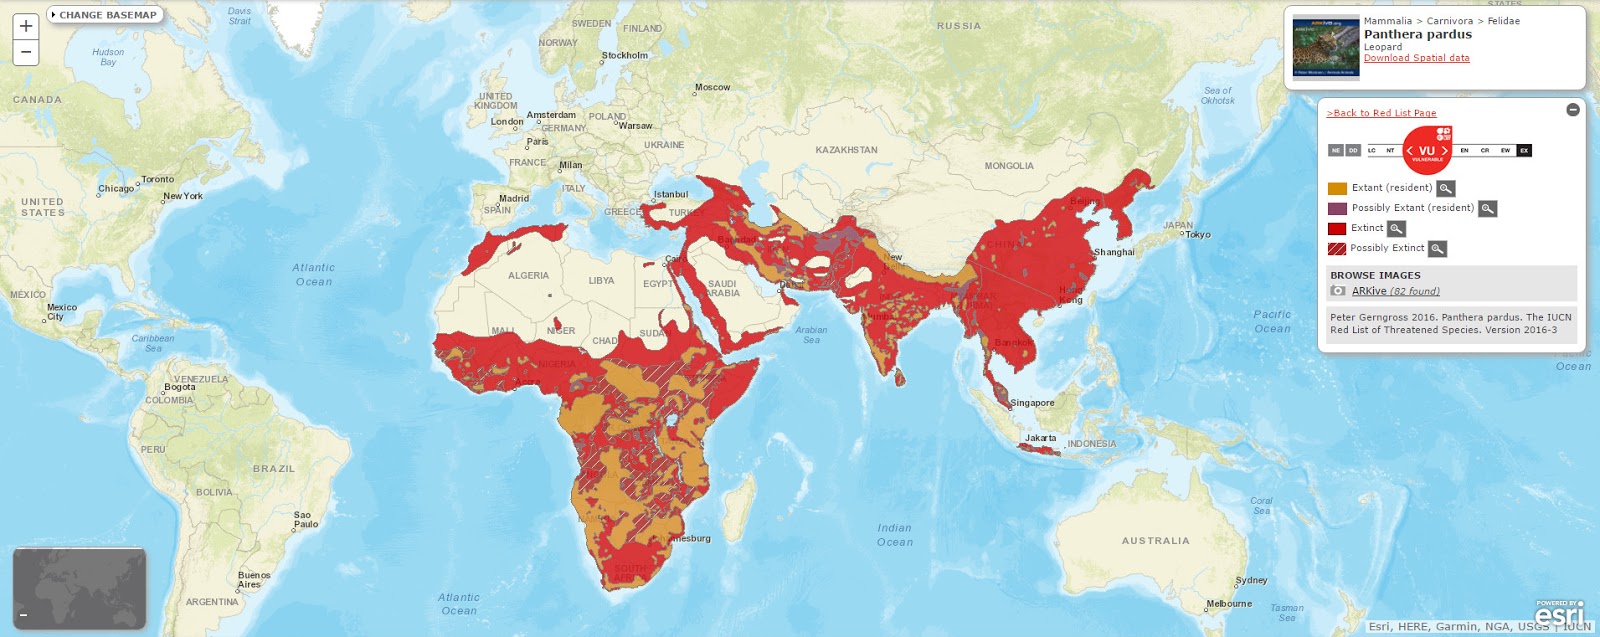 Mapping Endangered Species